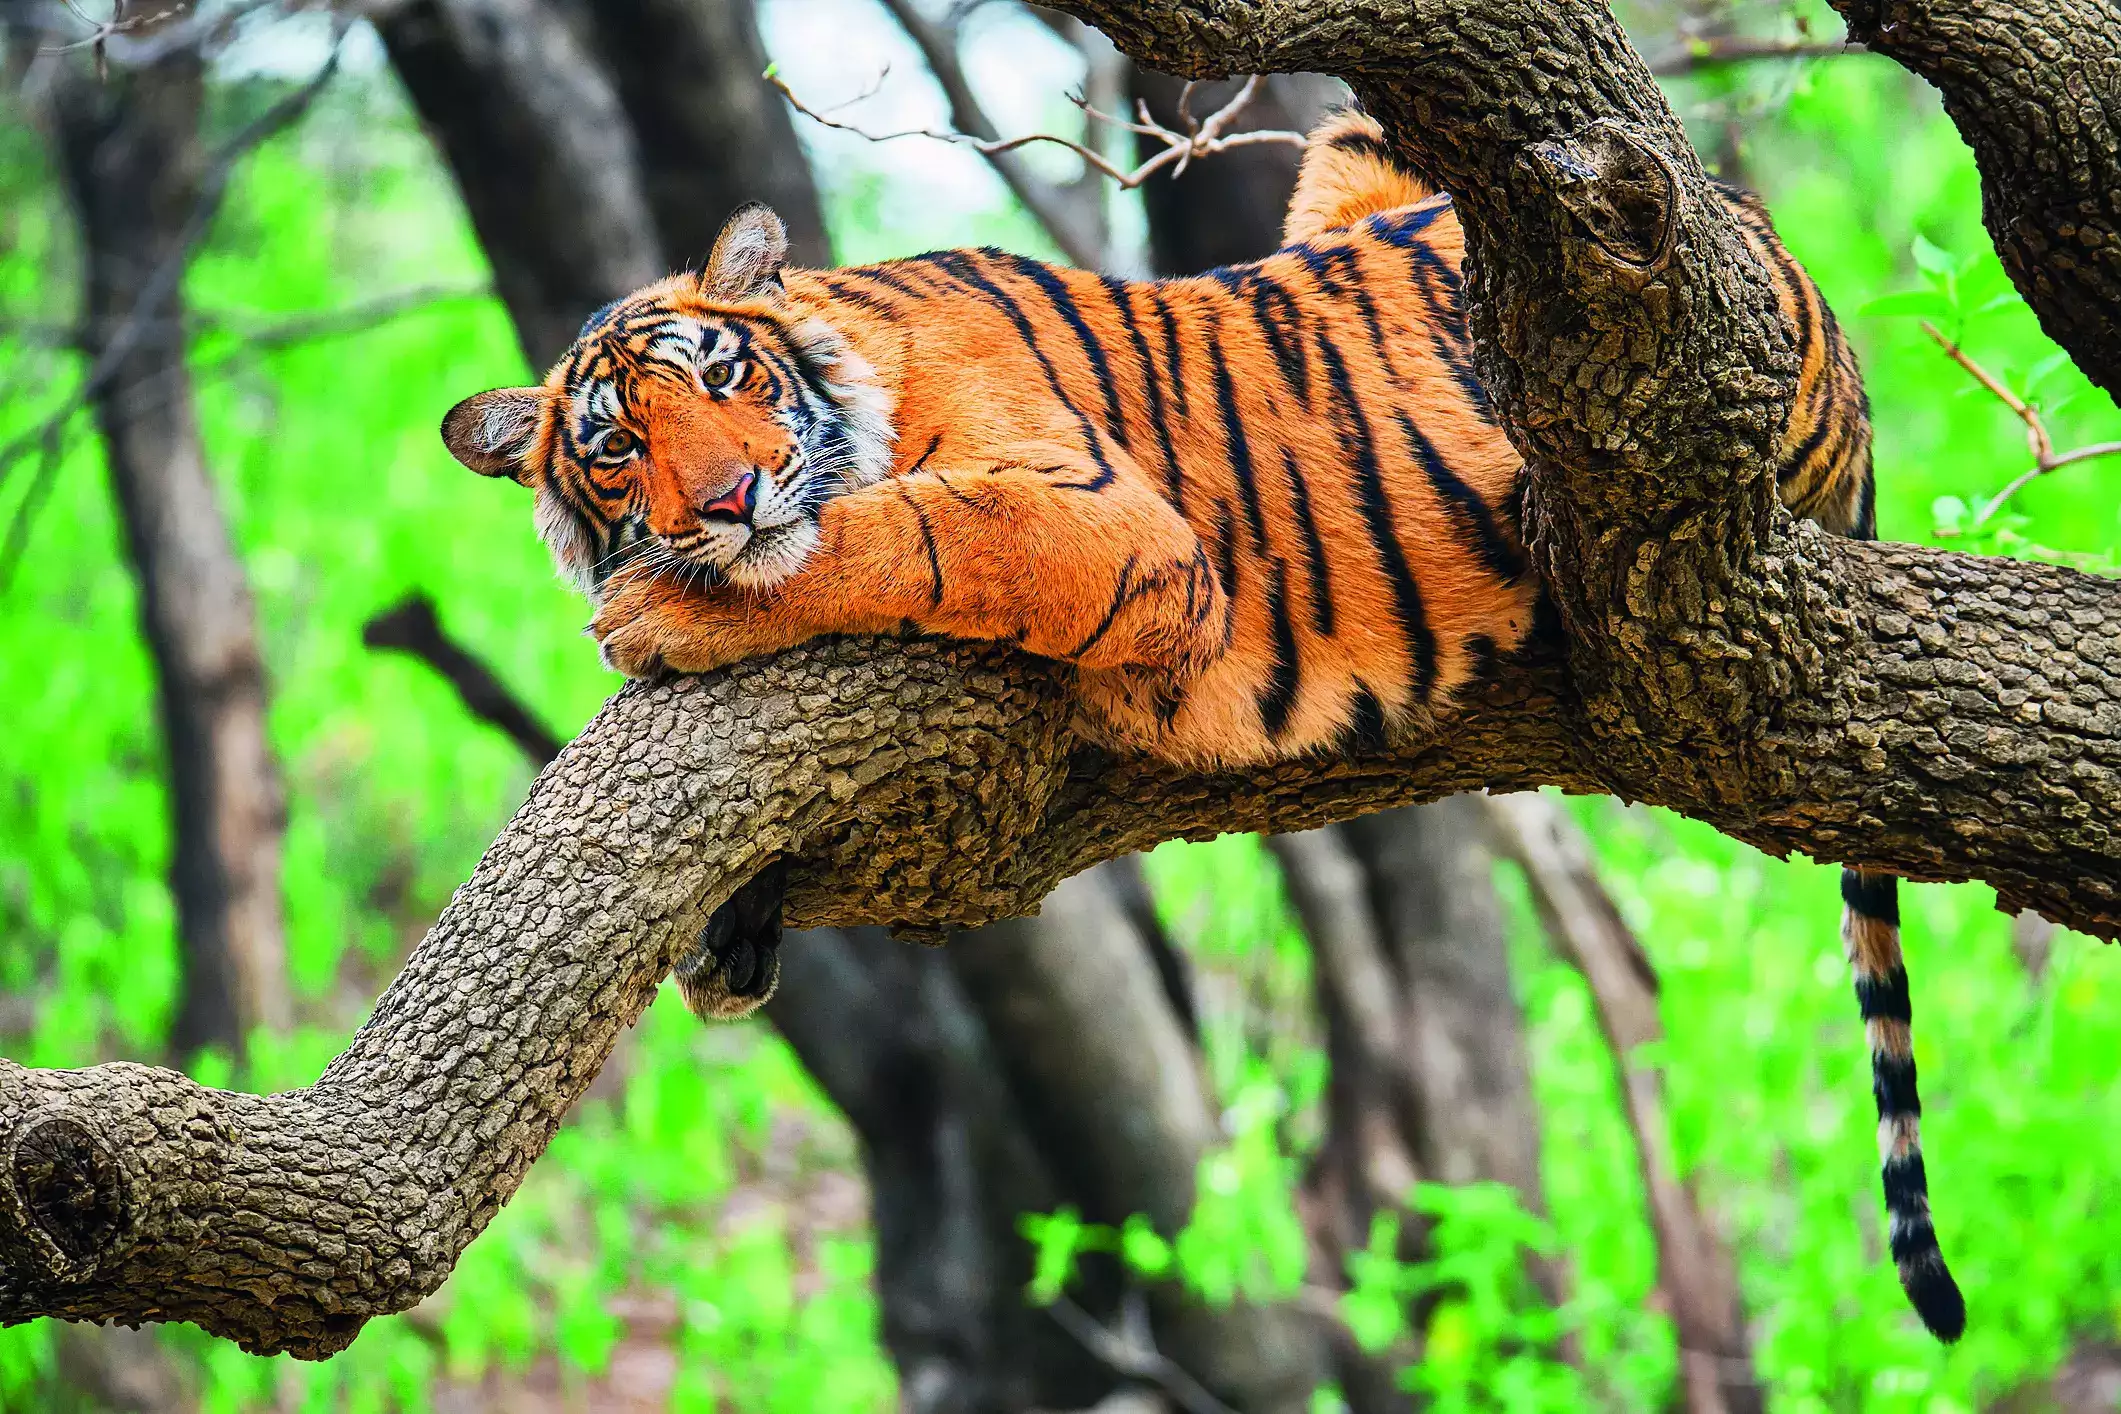 We Revere All Life-Forms By Conserving Tigers